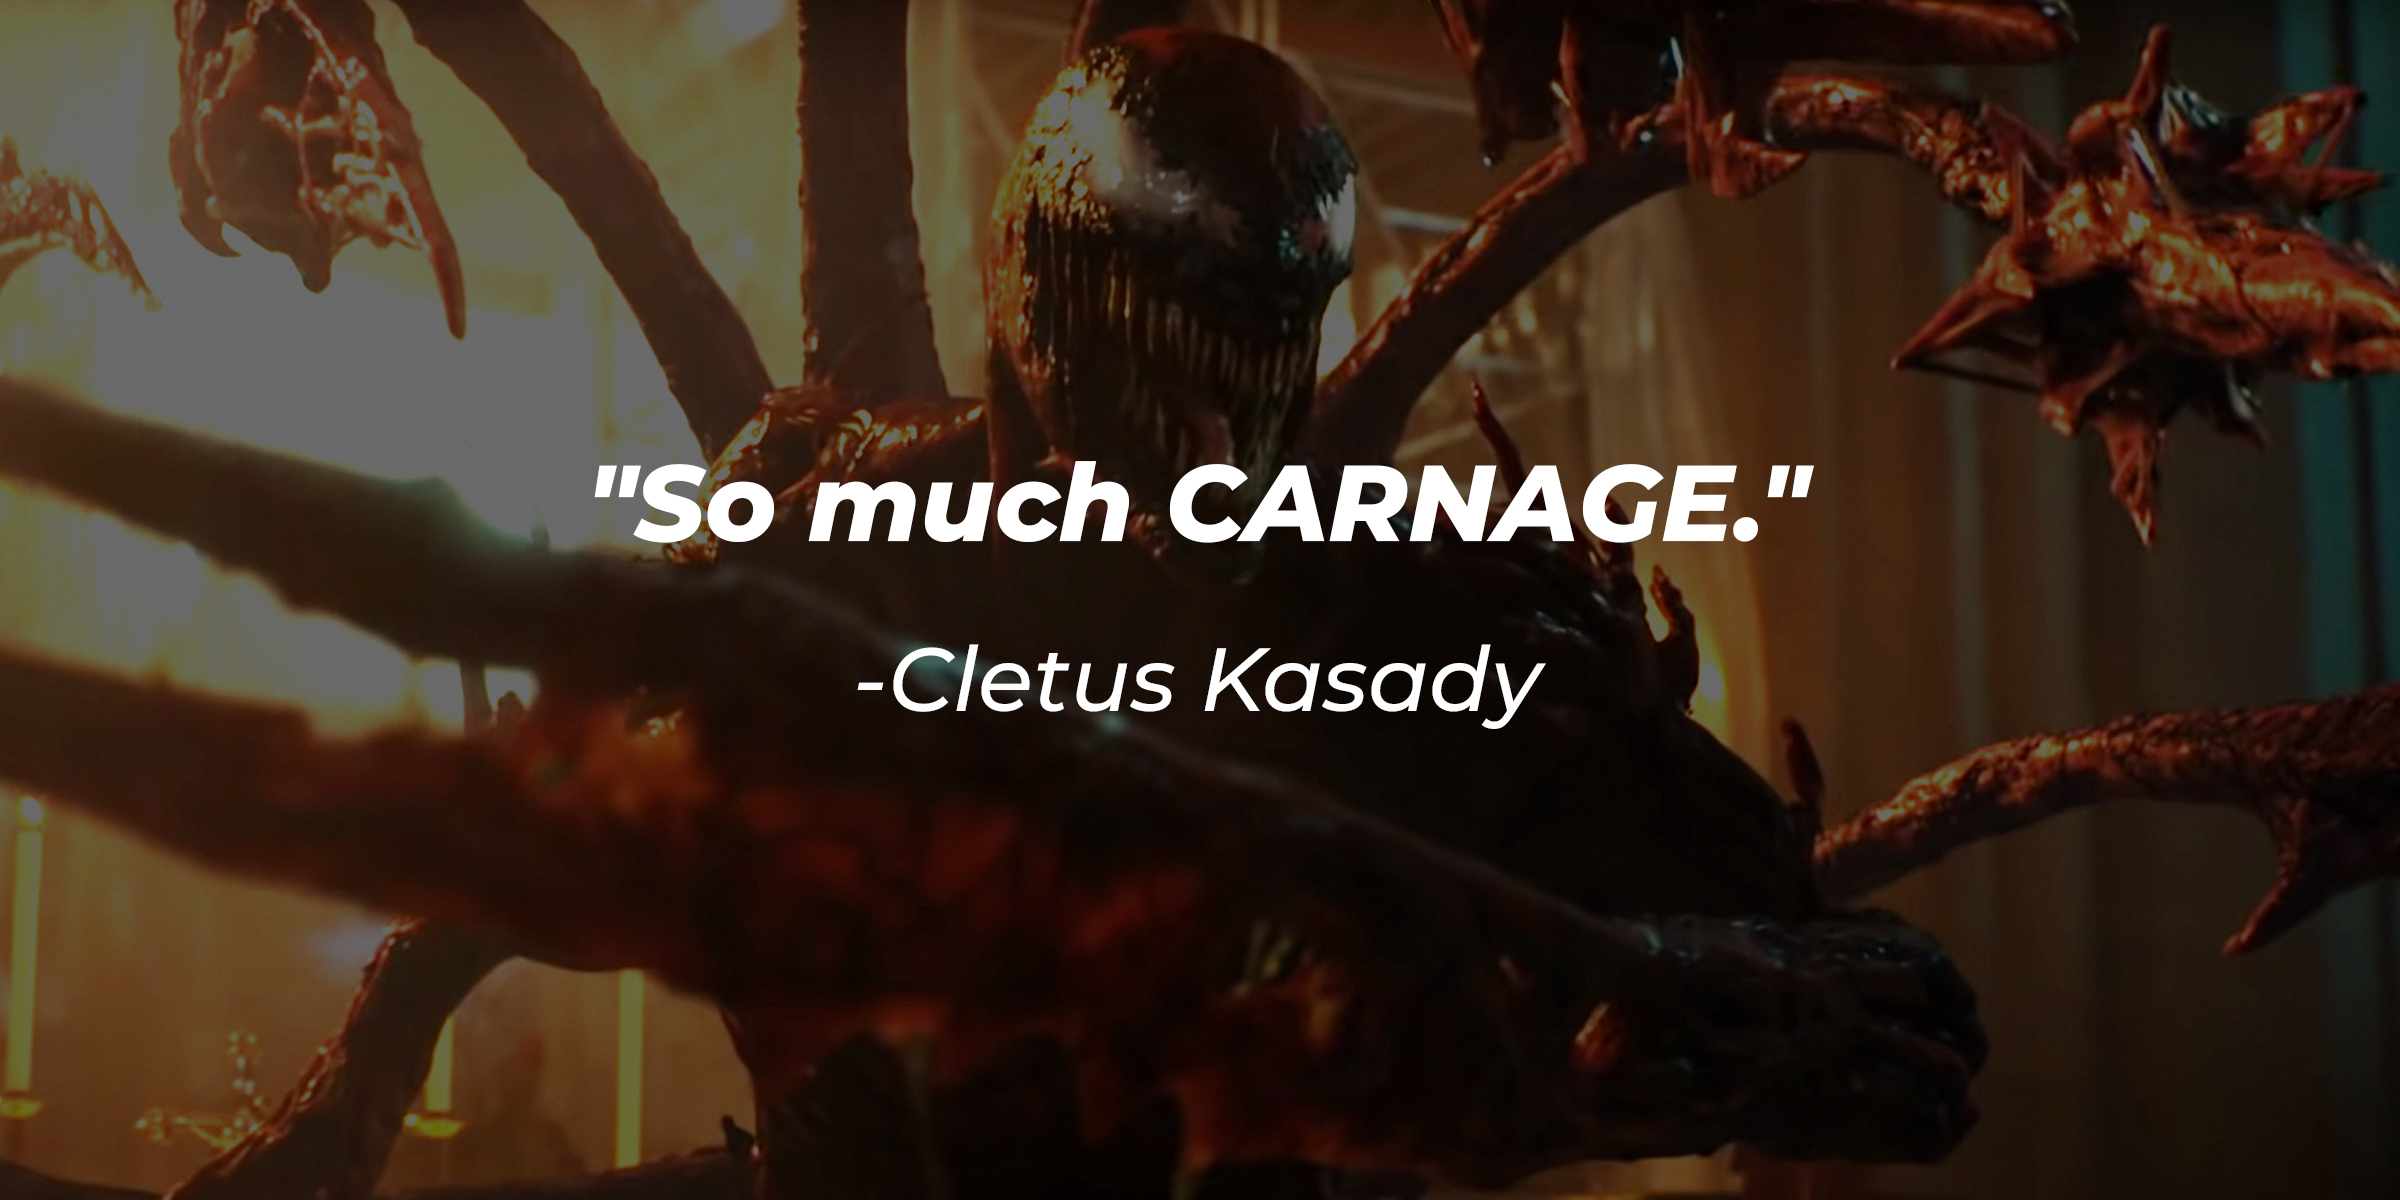 Carnage with his quote, "So much CARNAGE." | Source: YouTube/sonypictures